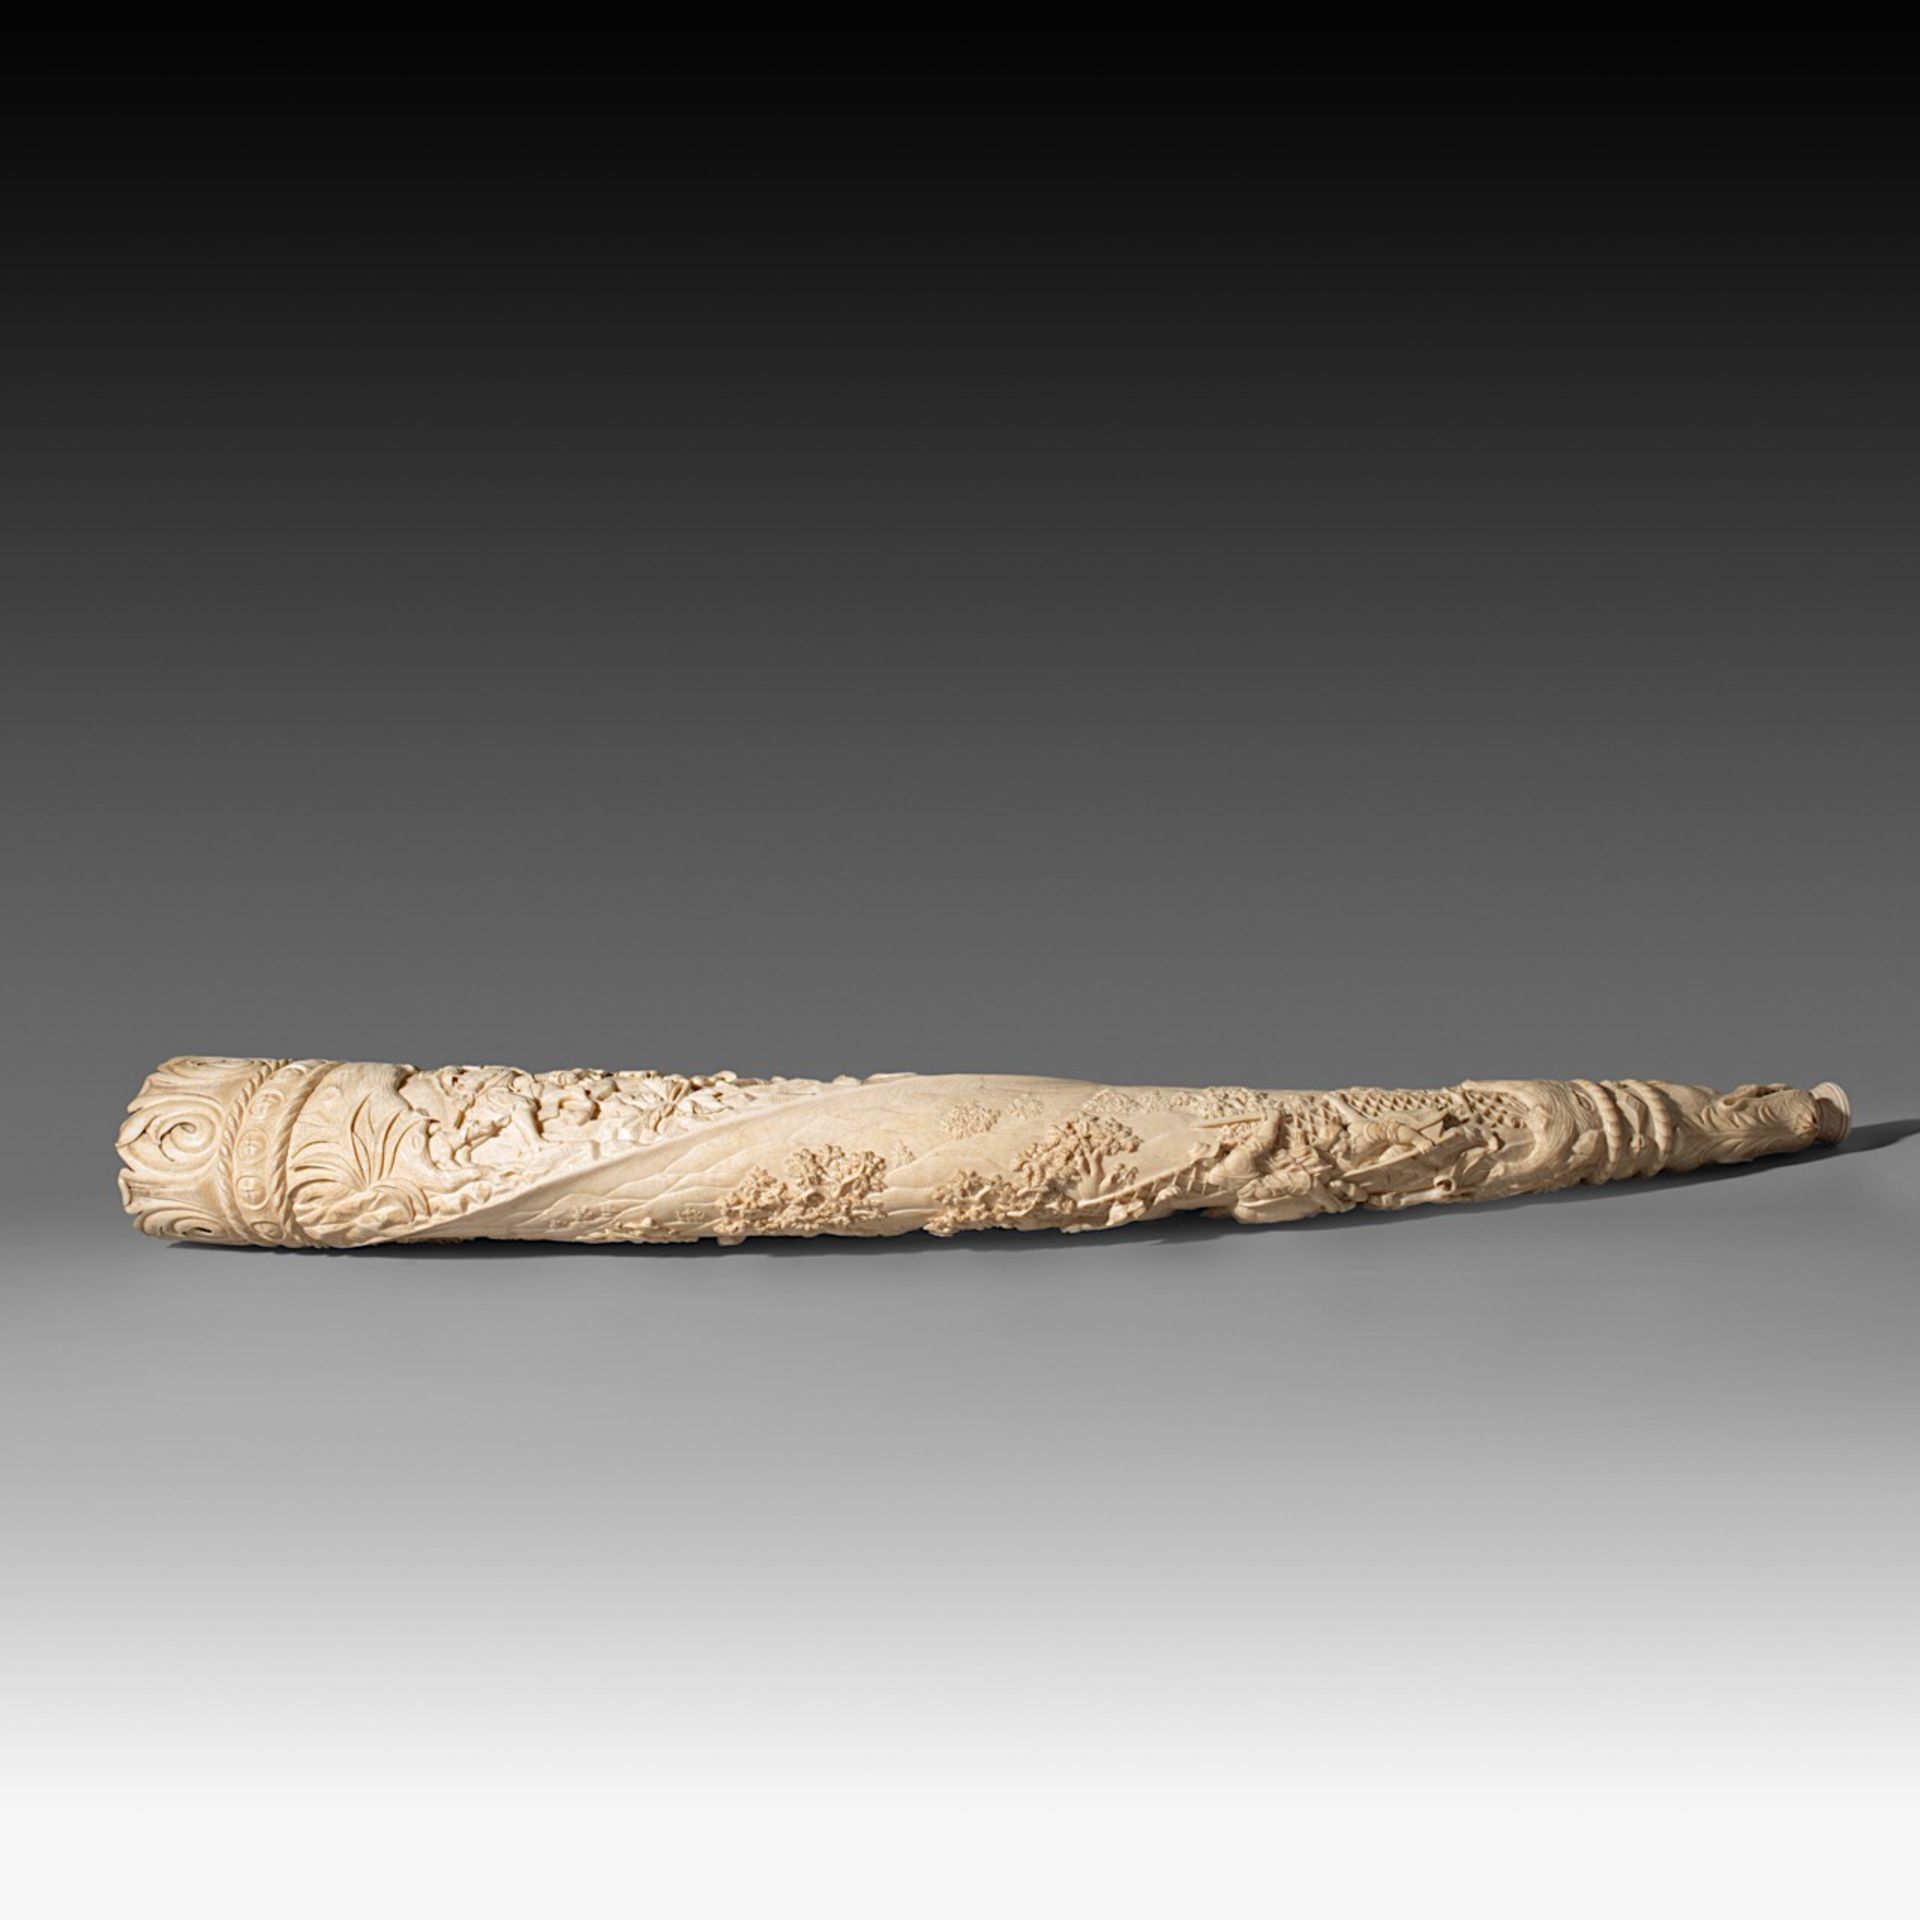 A 19th-century ivory hunting horn, last quarter 19th century, W 74,5 cm - 2850 g (+) - Image 5 of 11